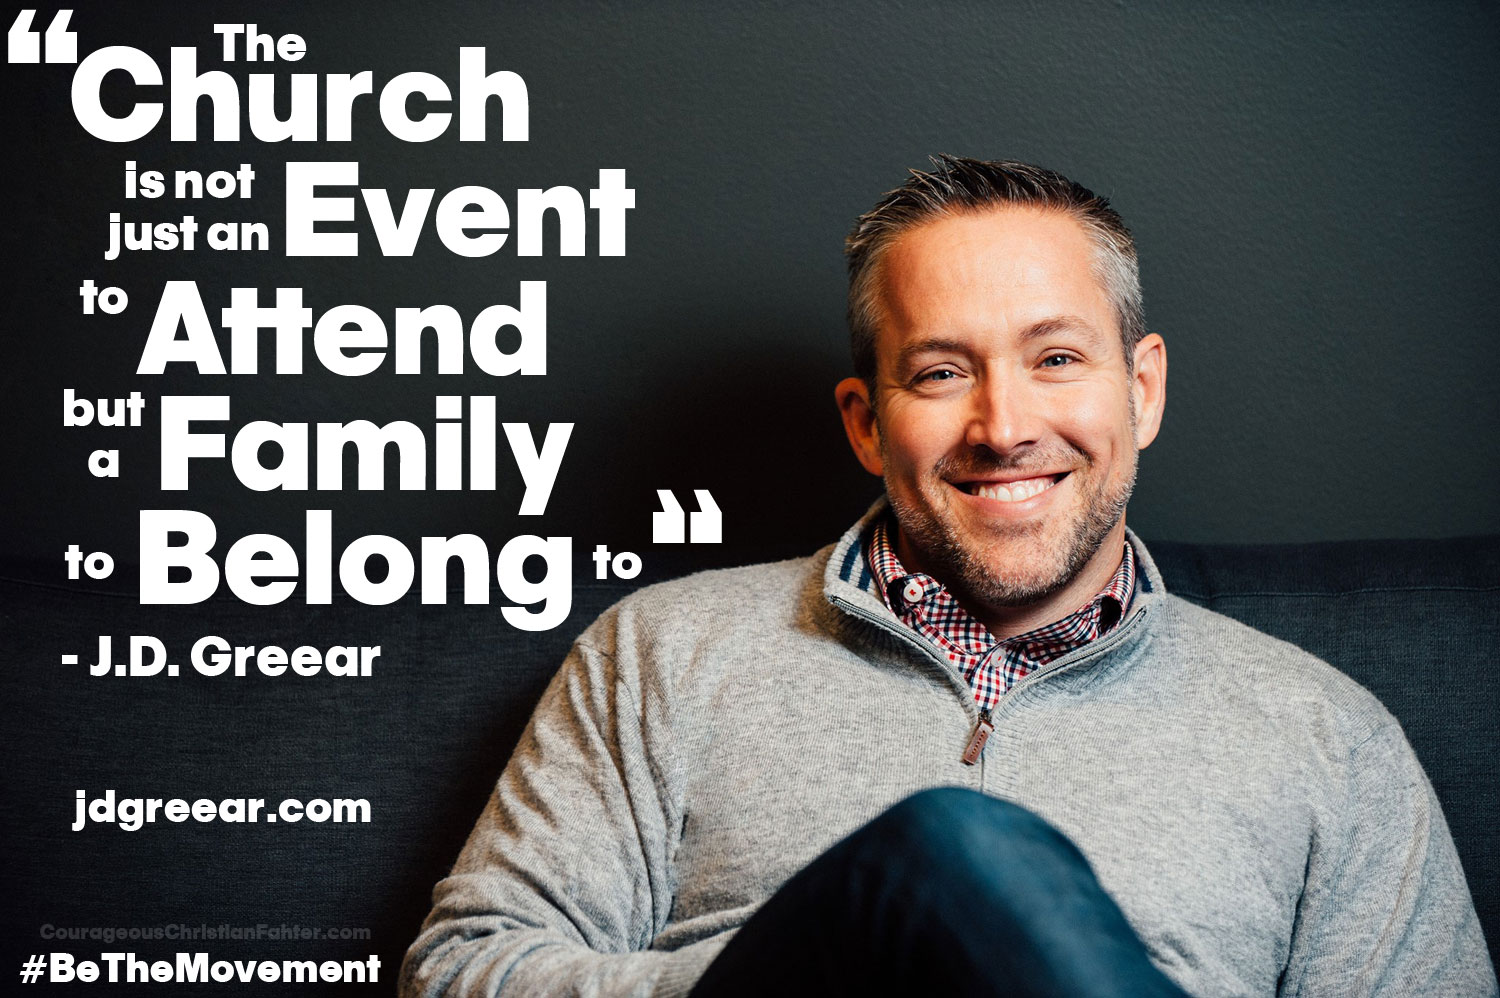 The church is not just an event to attend, but a family to belong to. #BeTheMovement A Quote from J.D. Greear on Facebook. #JDGreear